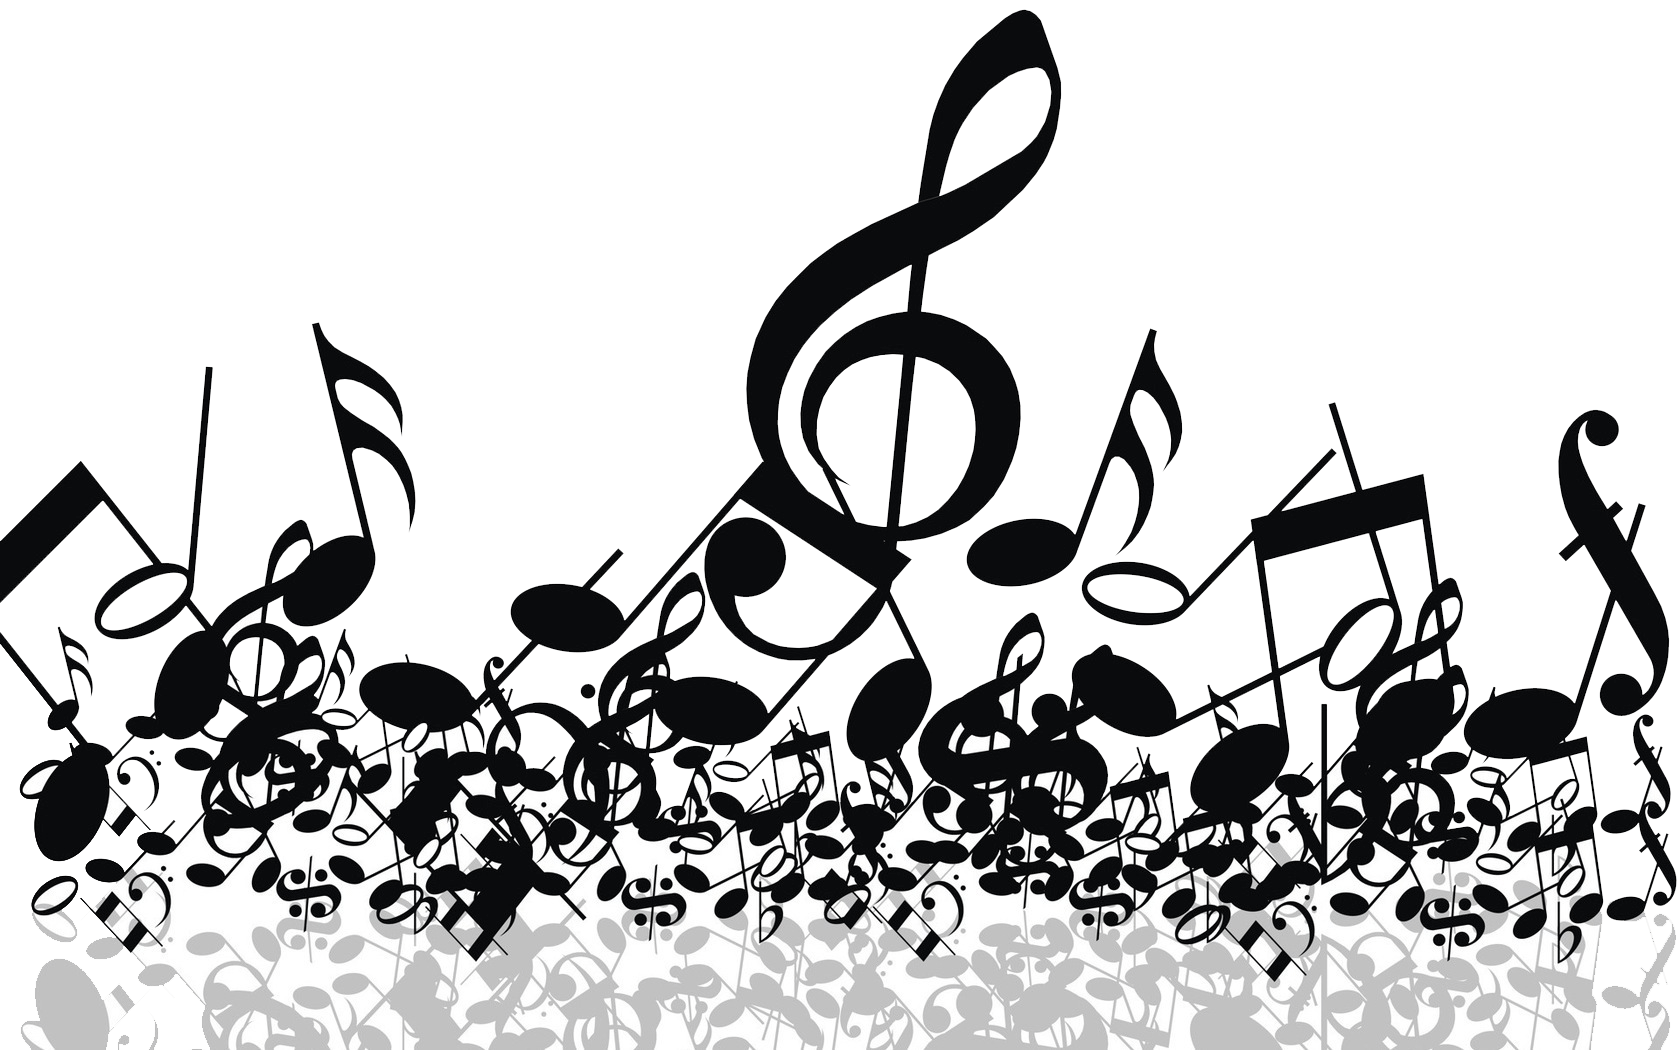 Musical clipart free download on WebStockReview